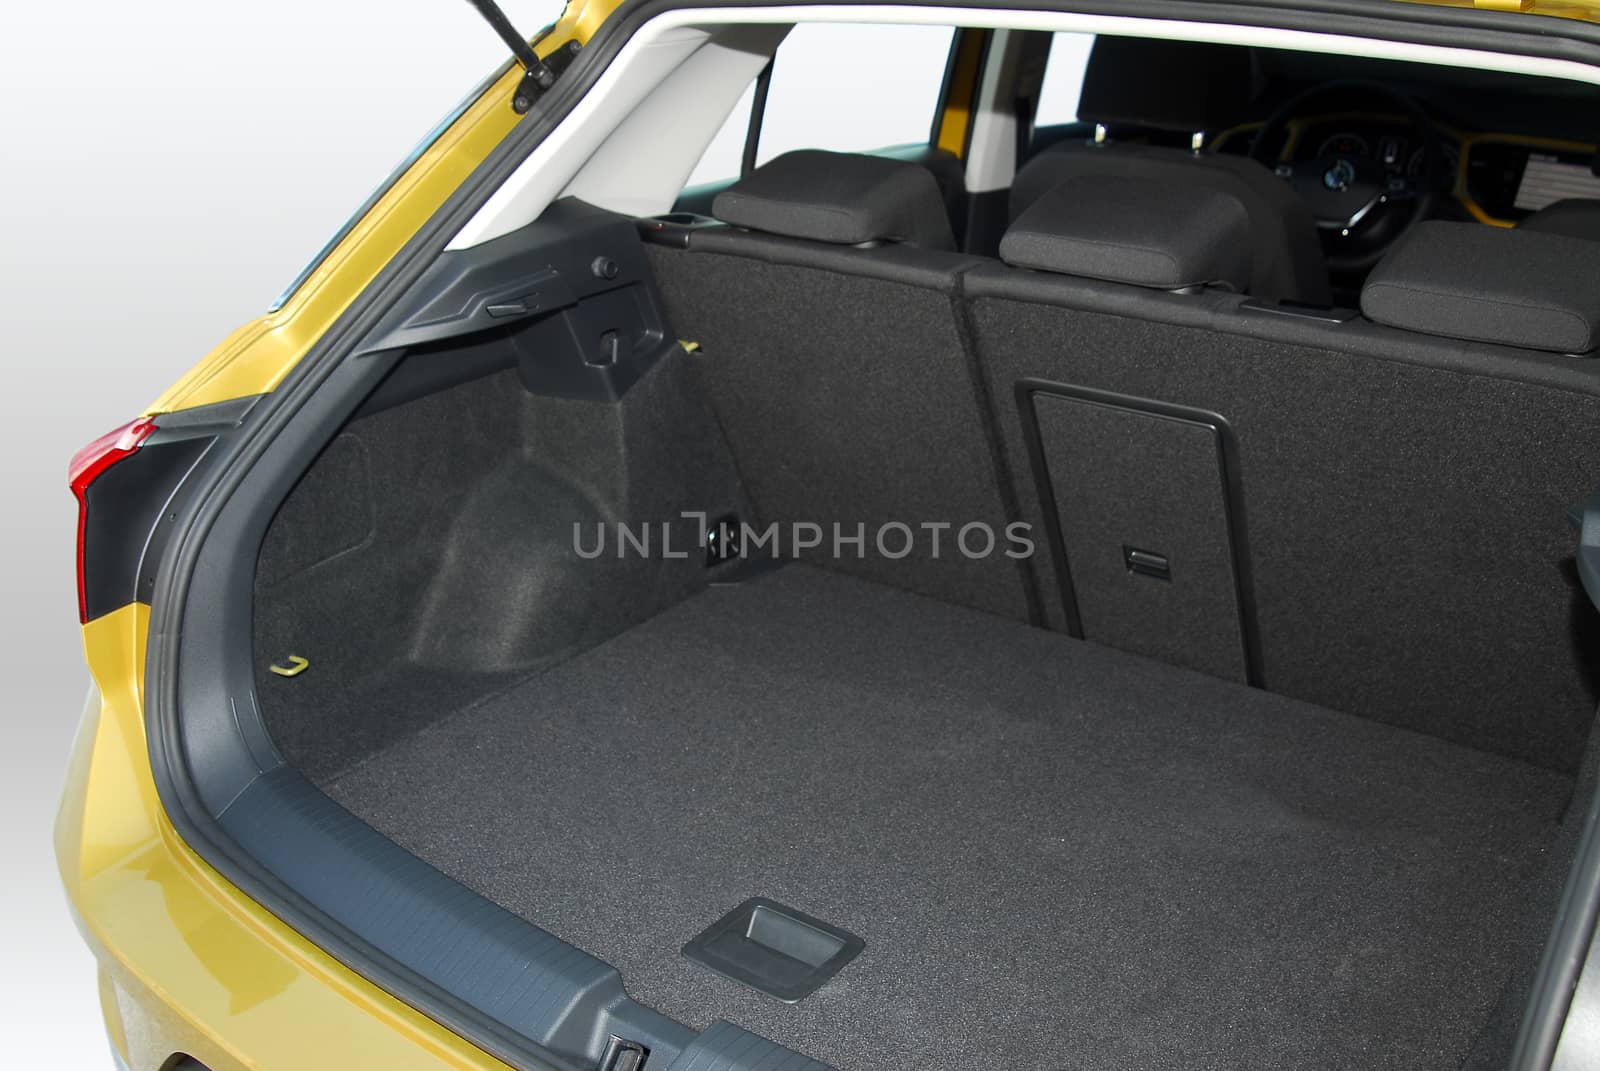 Empty trunk of the SUV